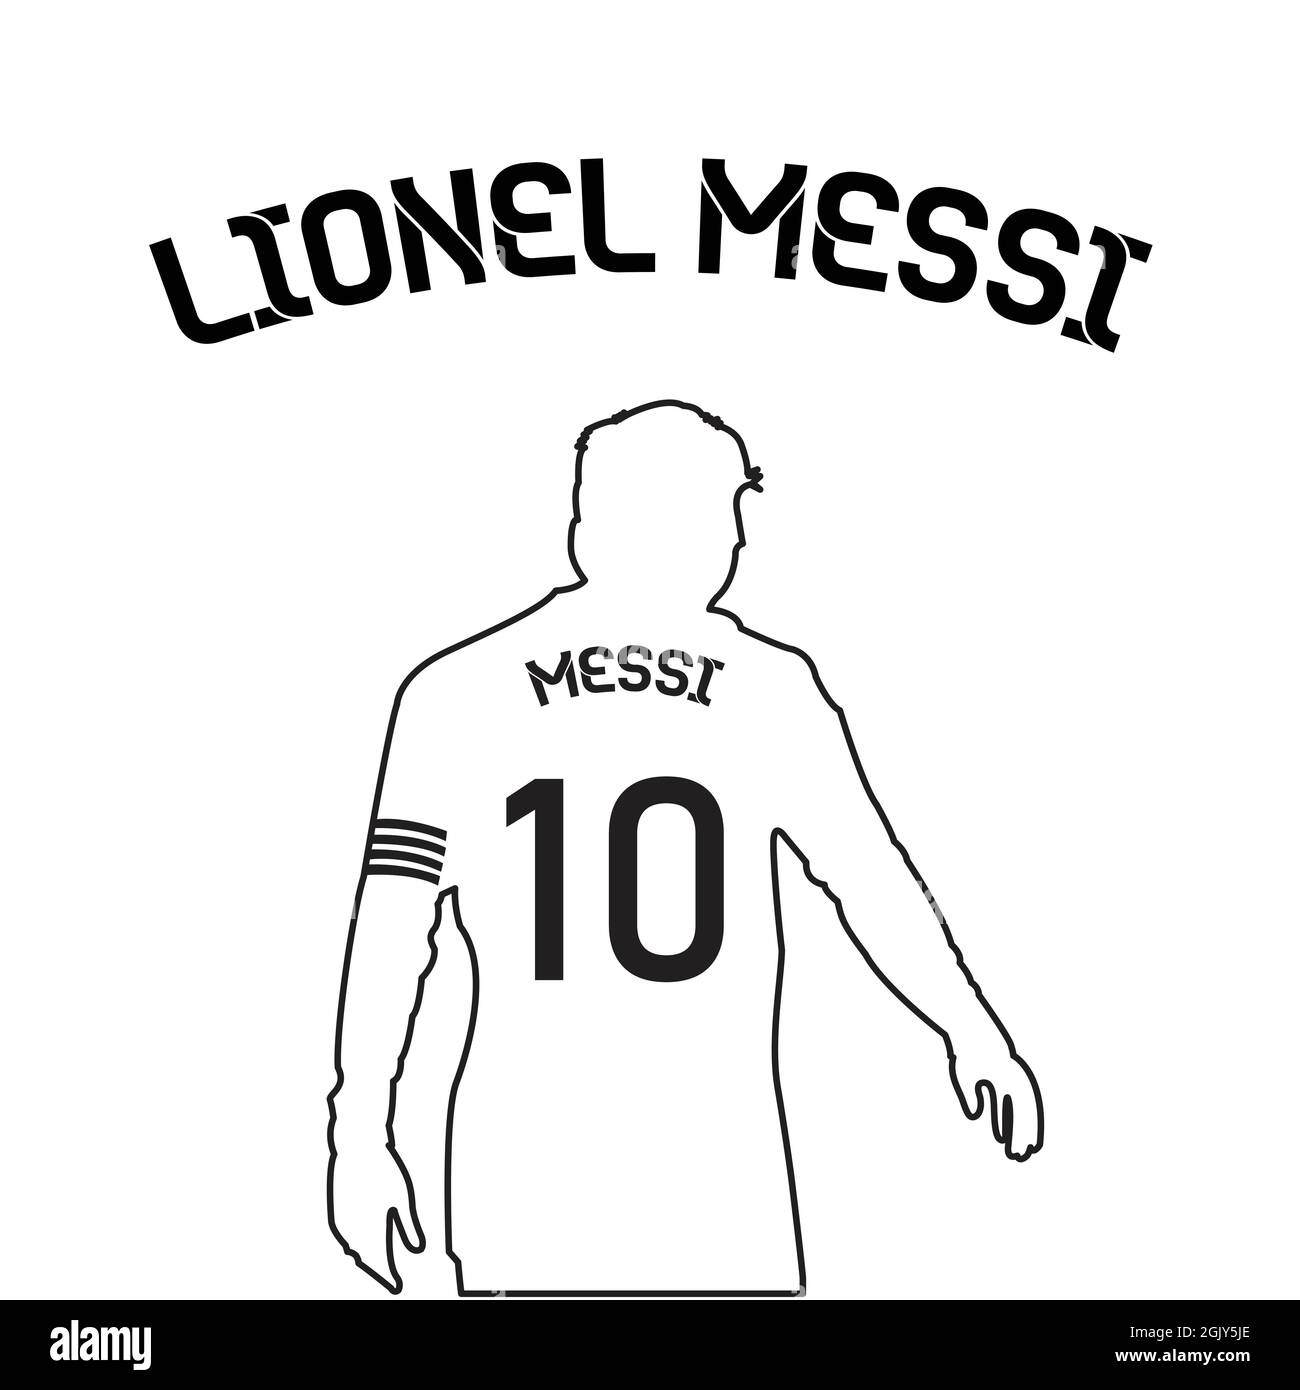 Lionel Messi vector silhouette black edition, the illustration can be ...